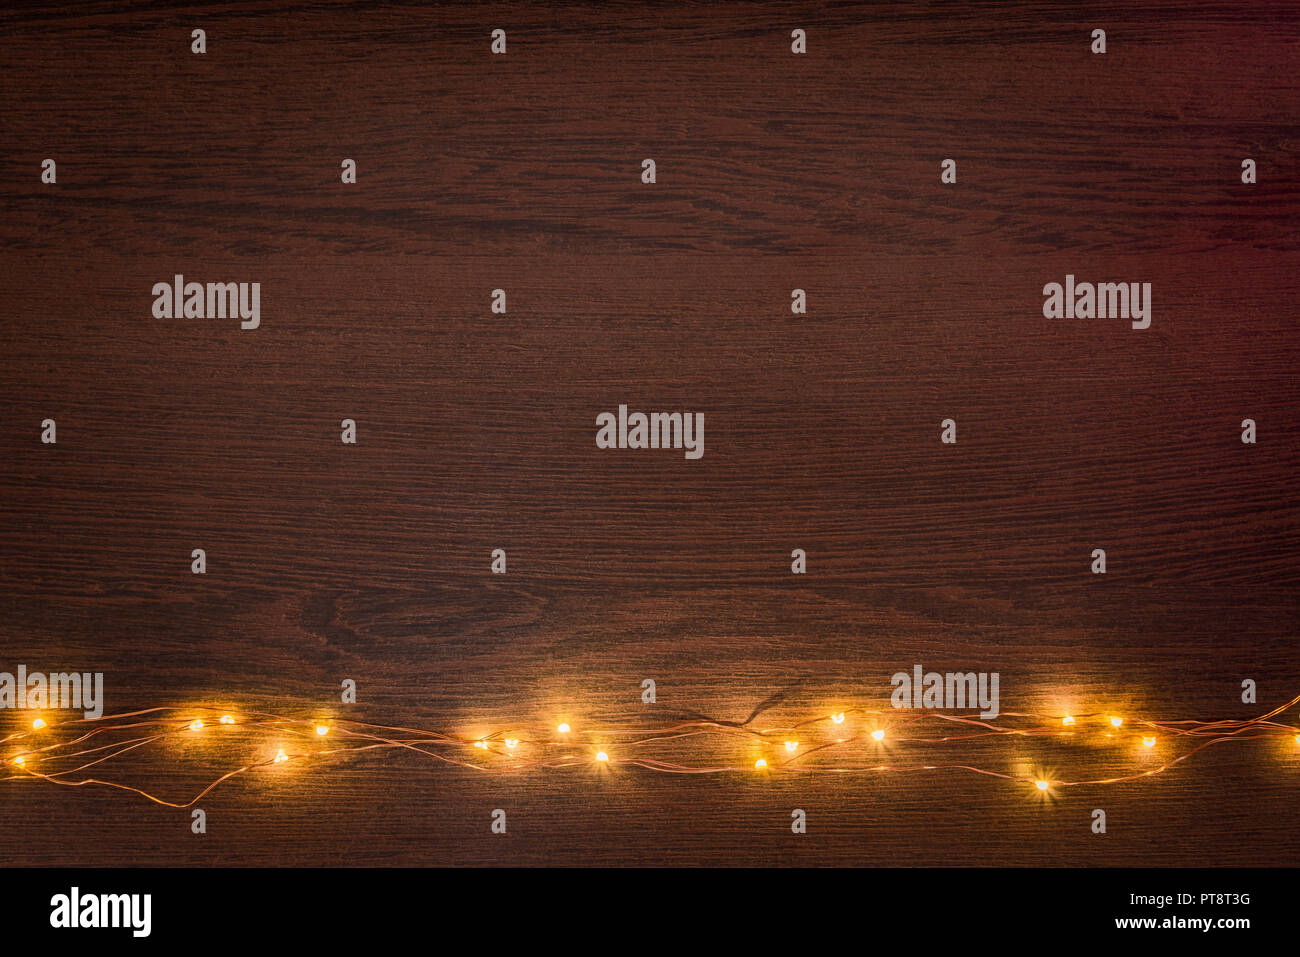 Christmas lights garland border over dark wooden background. Flat lay, copy space. Stock Photo